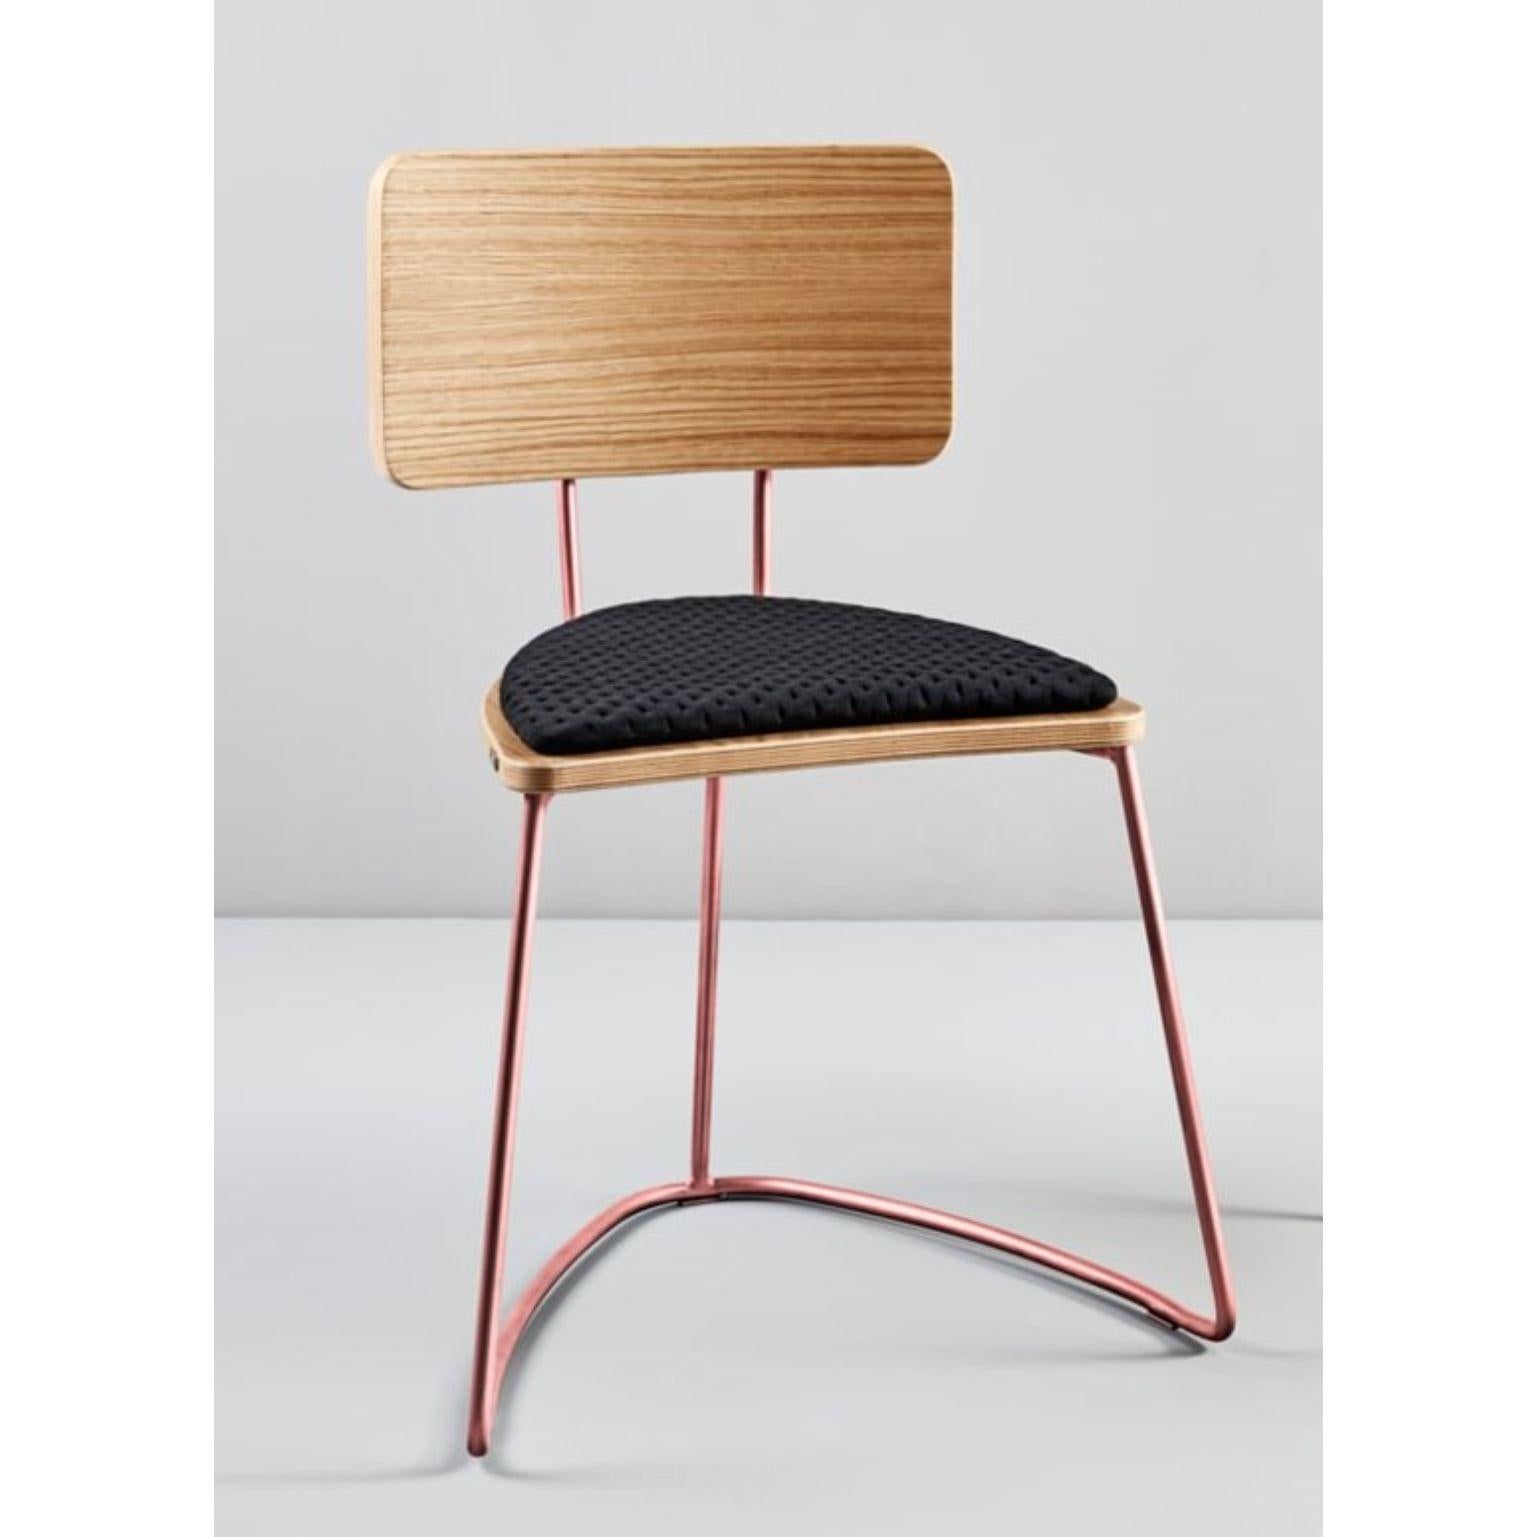 Boomerang chair, black by Pepe Albargues
Dimensions: W54, D54, H76, Seat 46.
Materials: Paint coated iron structure / gold / copper or chromed iron structure
Plywood backrest and seat covered with a natural oak wood layer
Upholstered seat